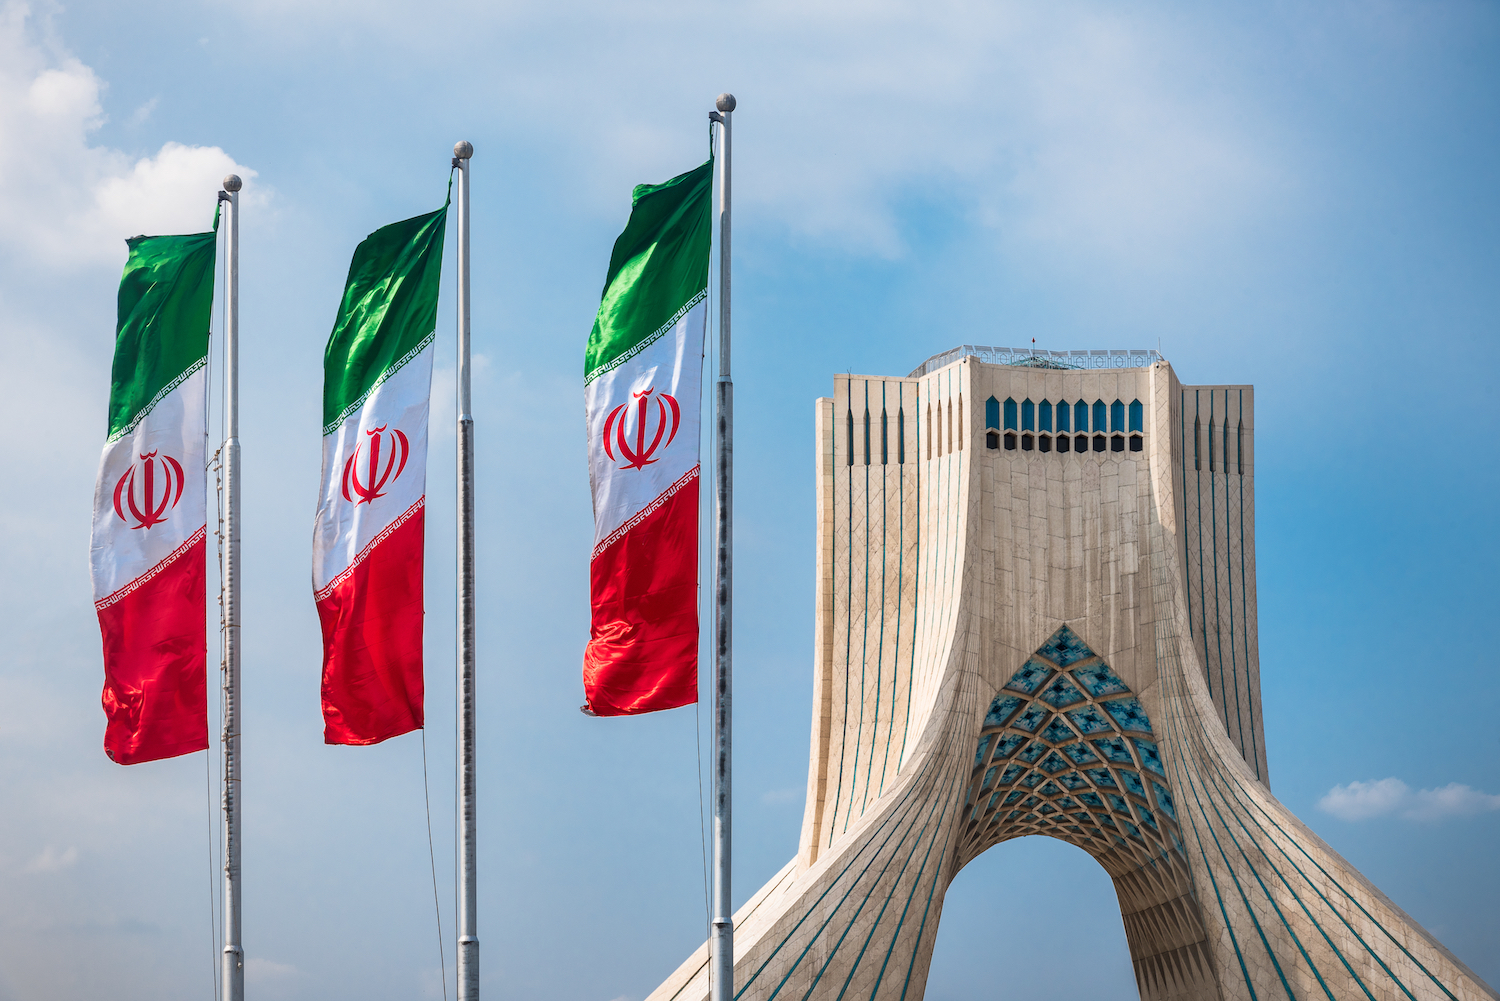 Cheap Power Is Luring Battered Bitcoin Miners To Iran